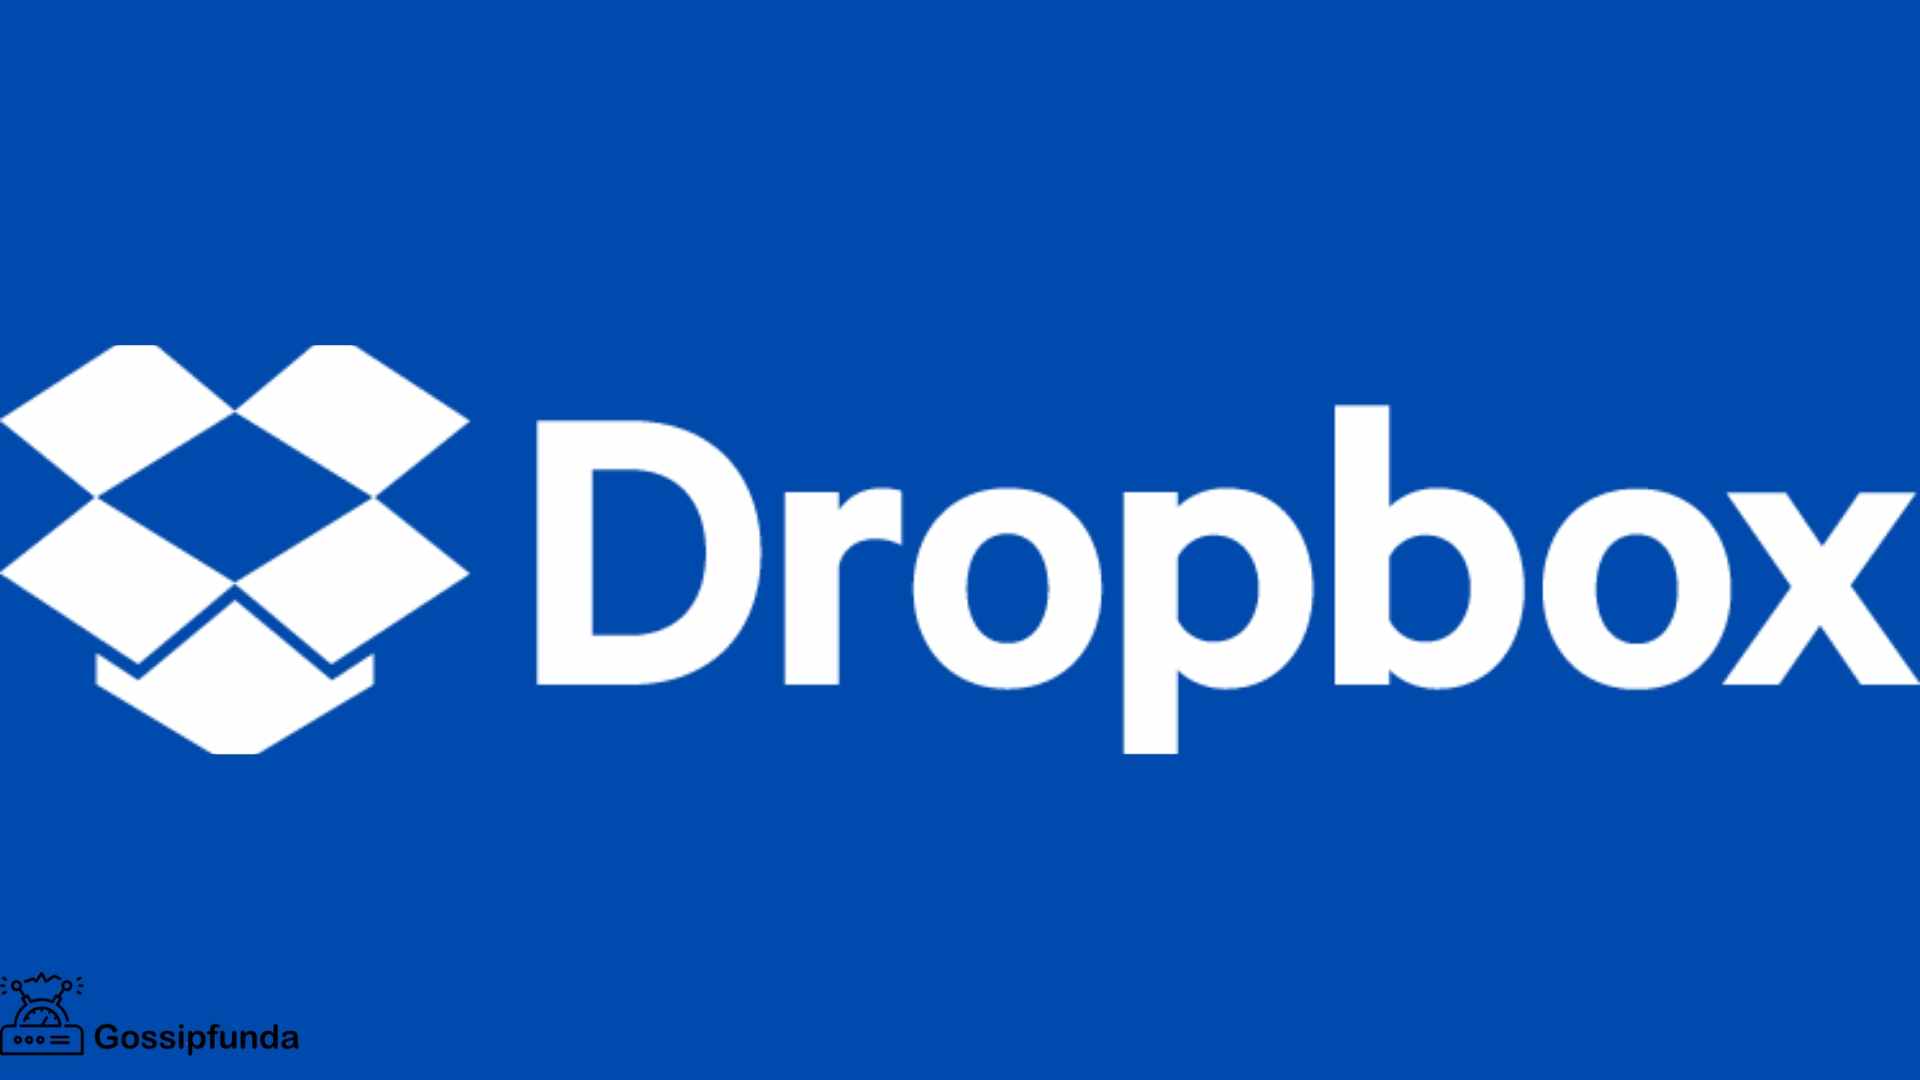 how to add another user in dropbox